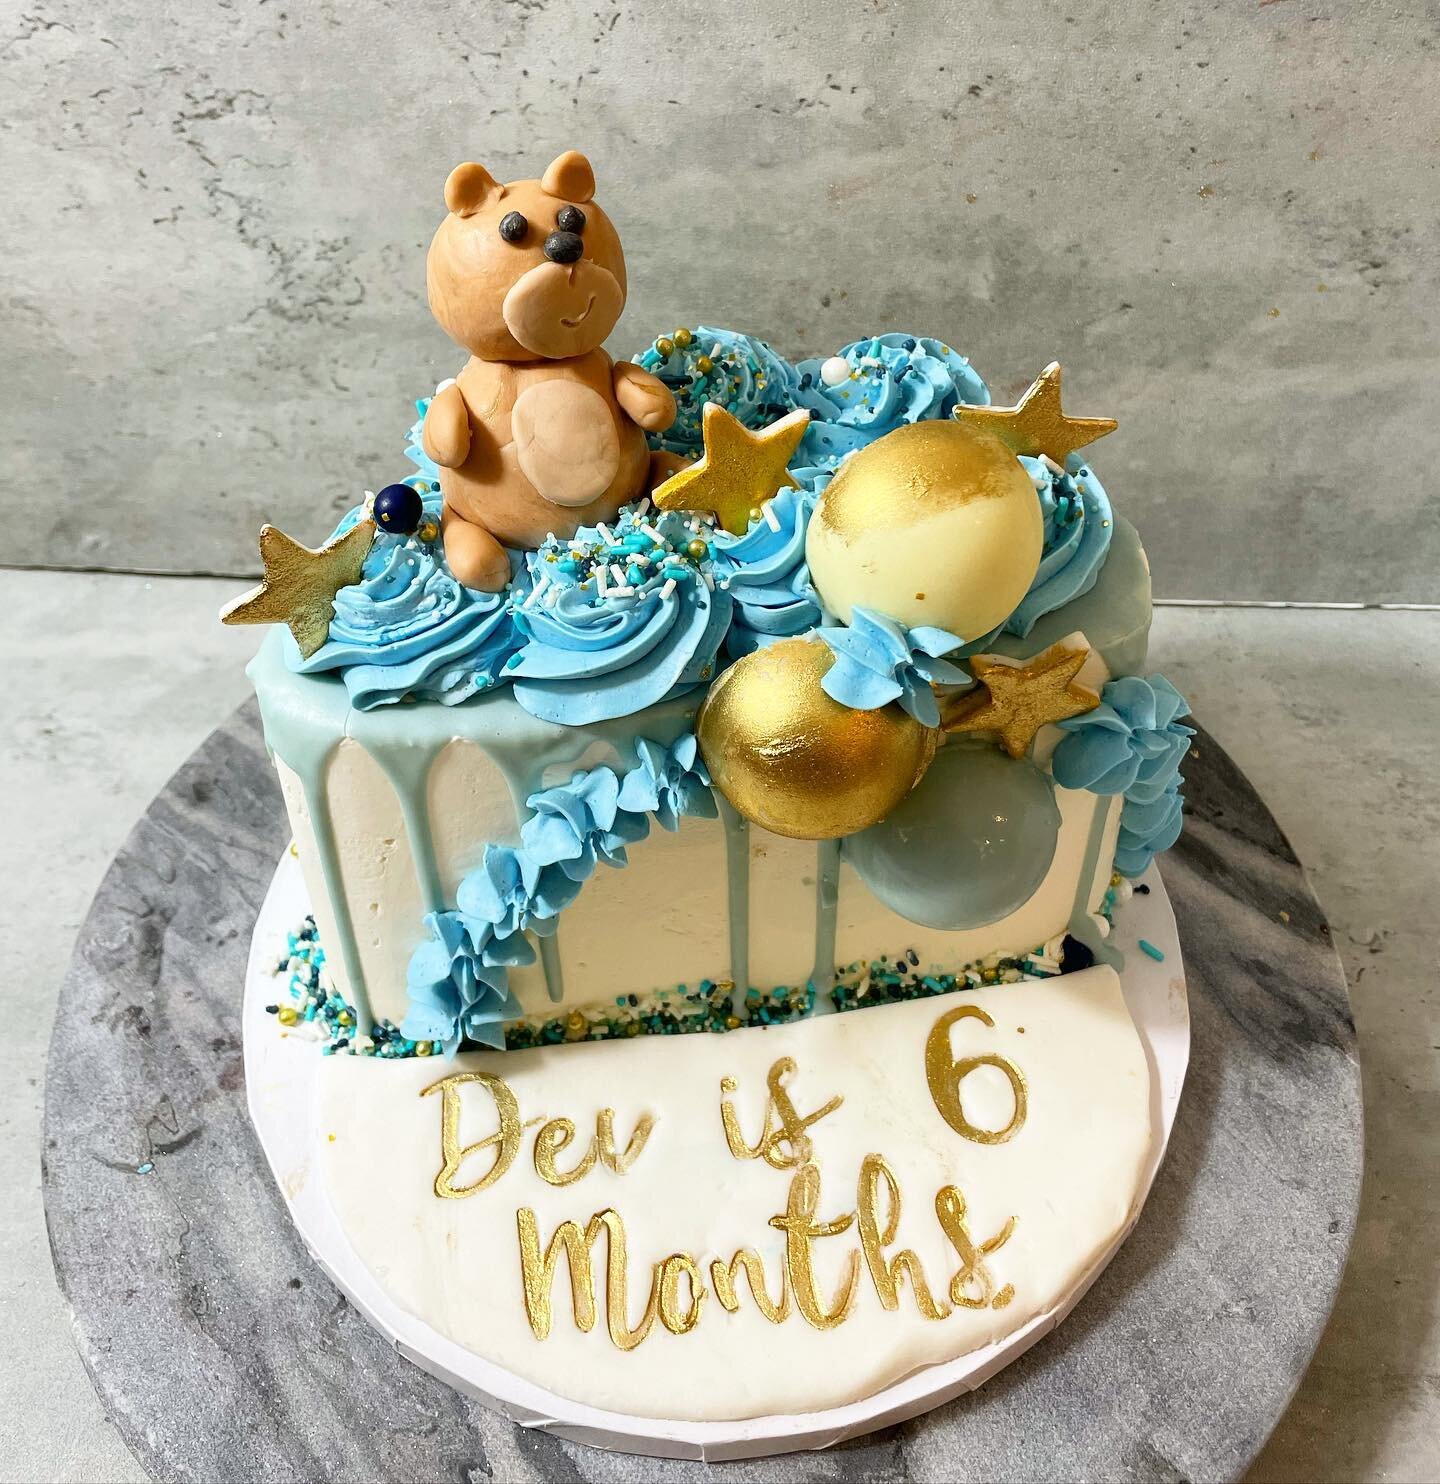 What a cute half birthday cake! 💙🐻⚪️✨🍼

I&rsquo;m going to start practicing some things with fondant (I will never ever make full on fondant cakes, not my thing. But making decorations with it sometimes is fun, though super difficult for me...) 

